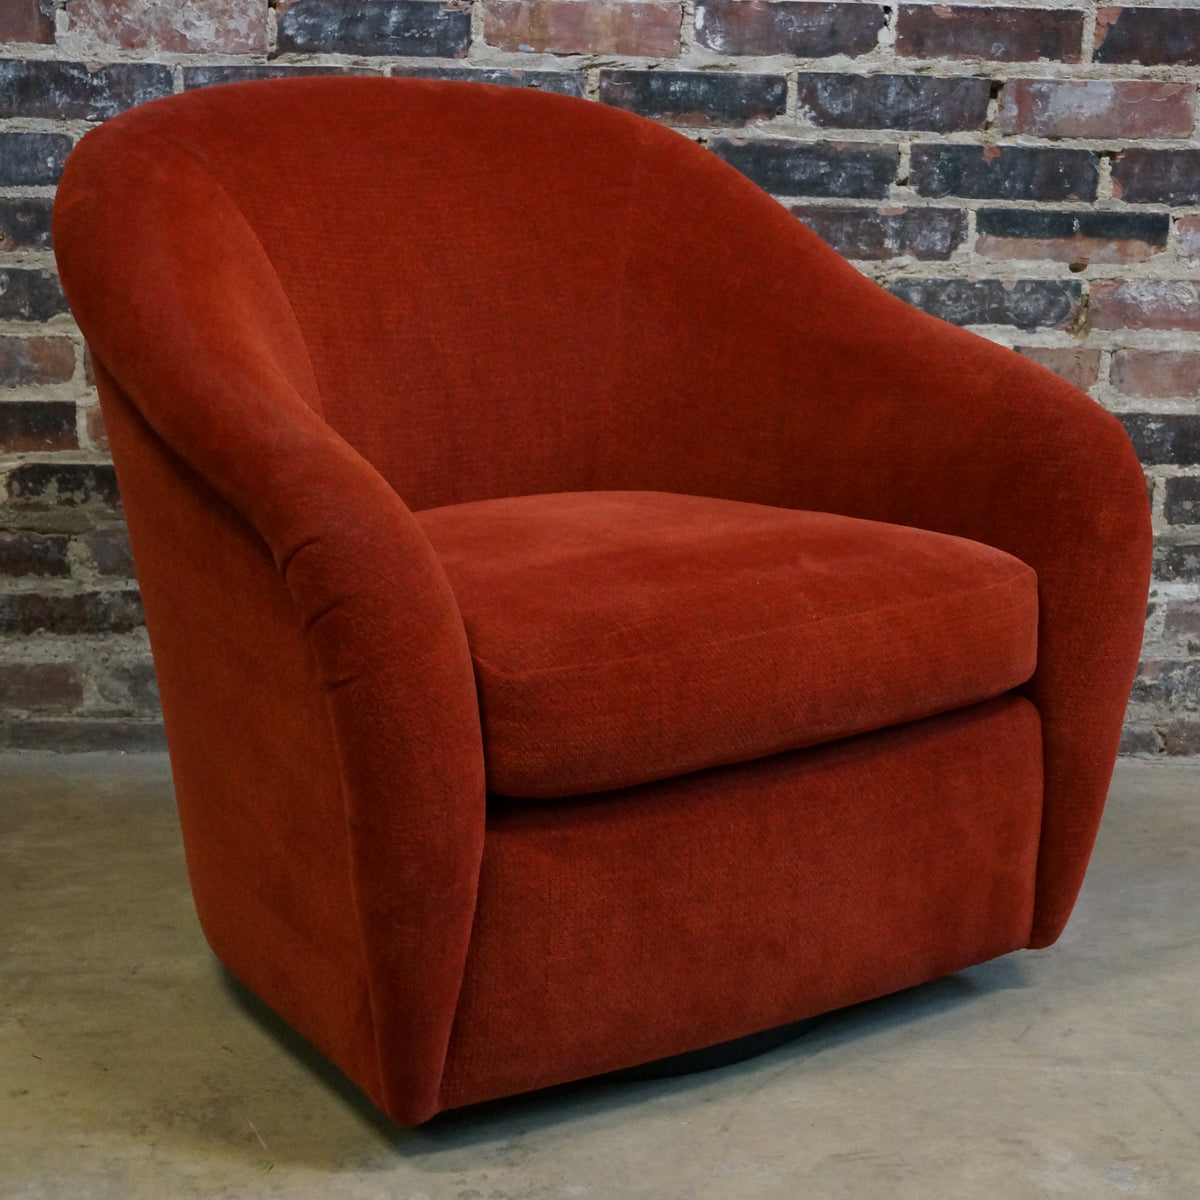 Interior Crafts Mid-Century tub chair on Plinth Base red color, spice color